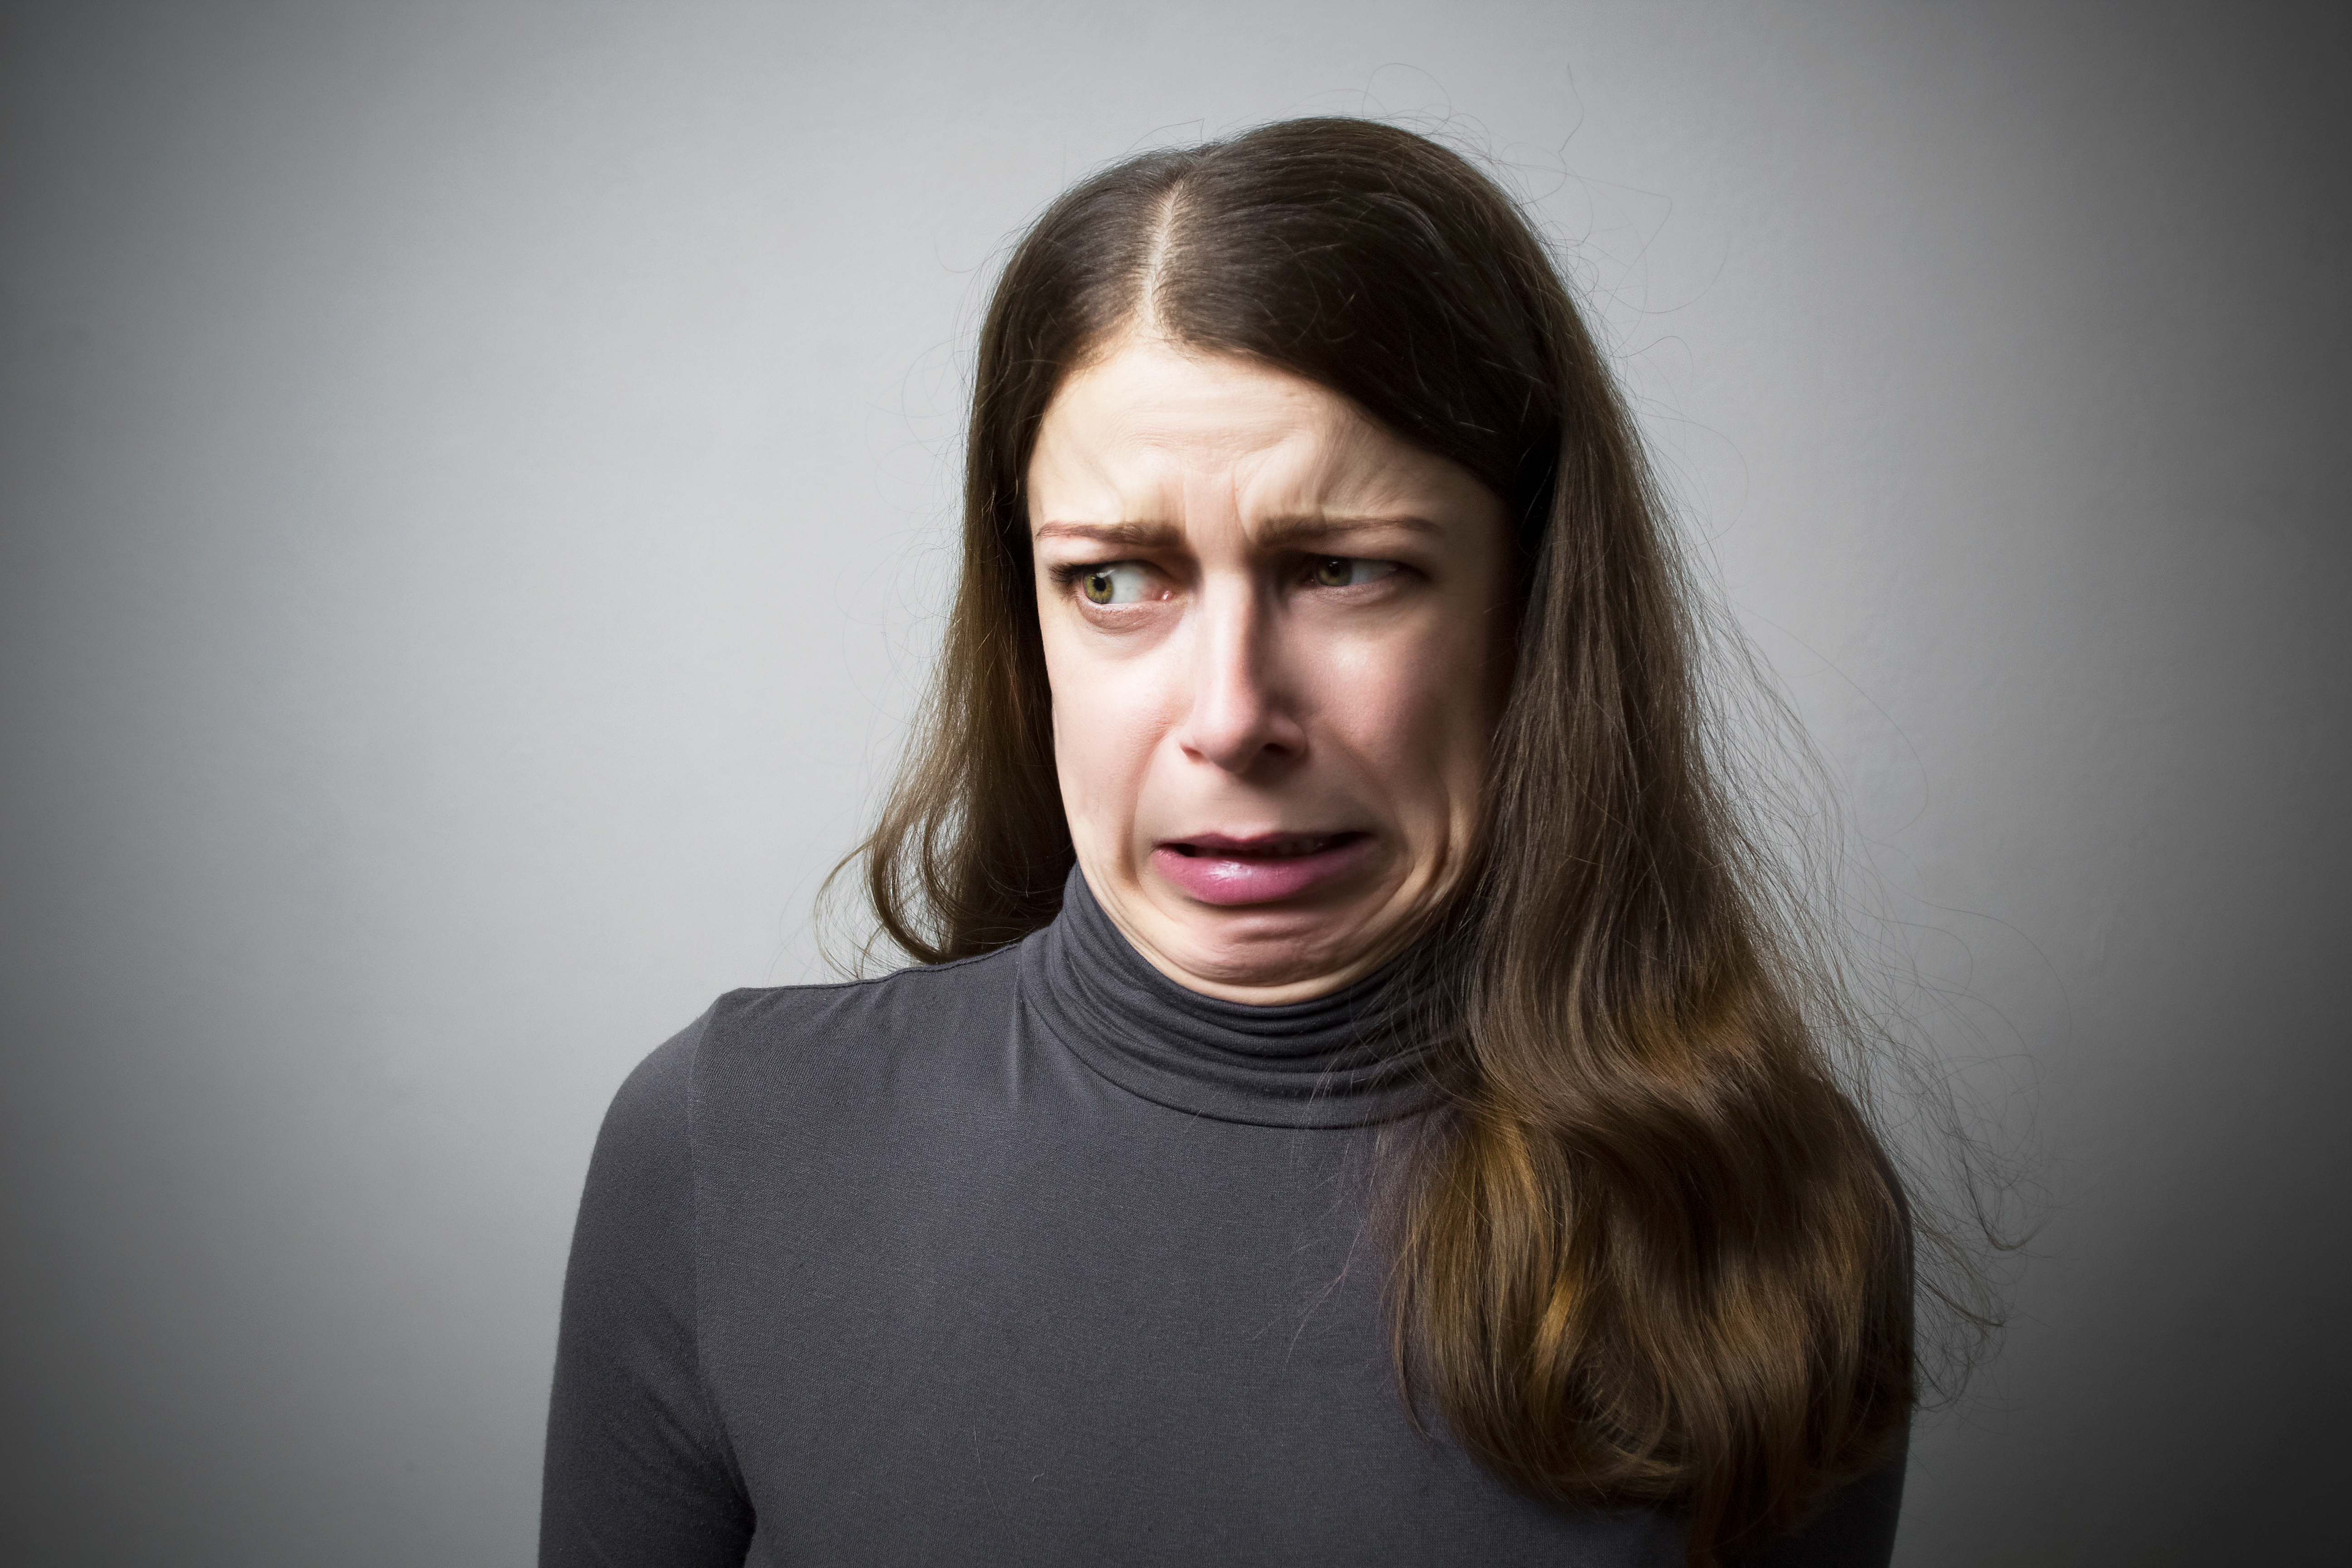 Disgusted woman | Shutterstock